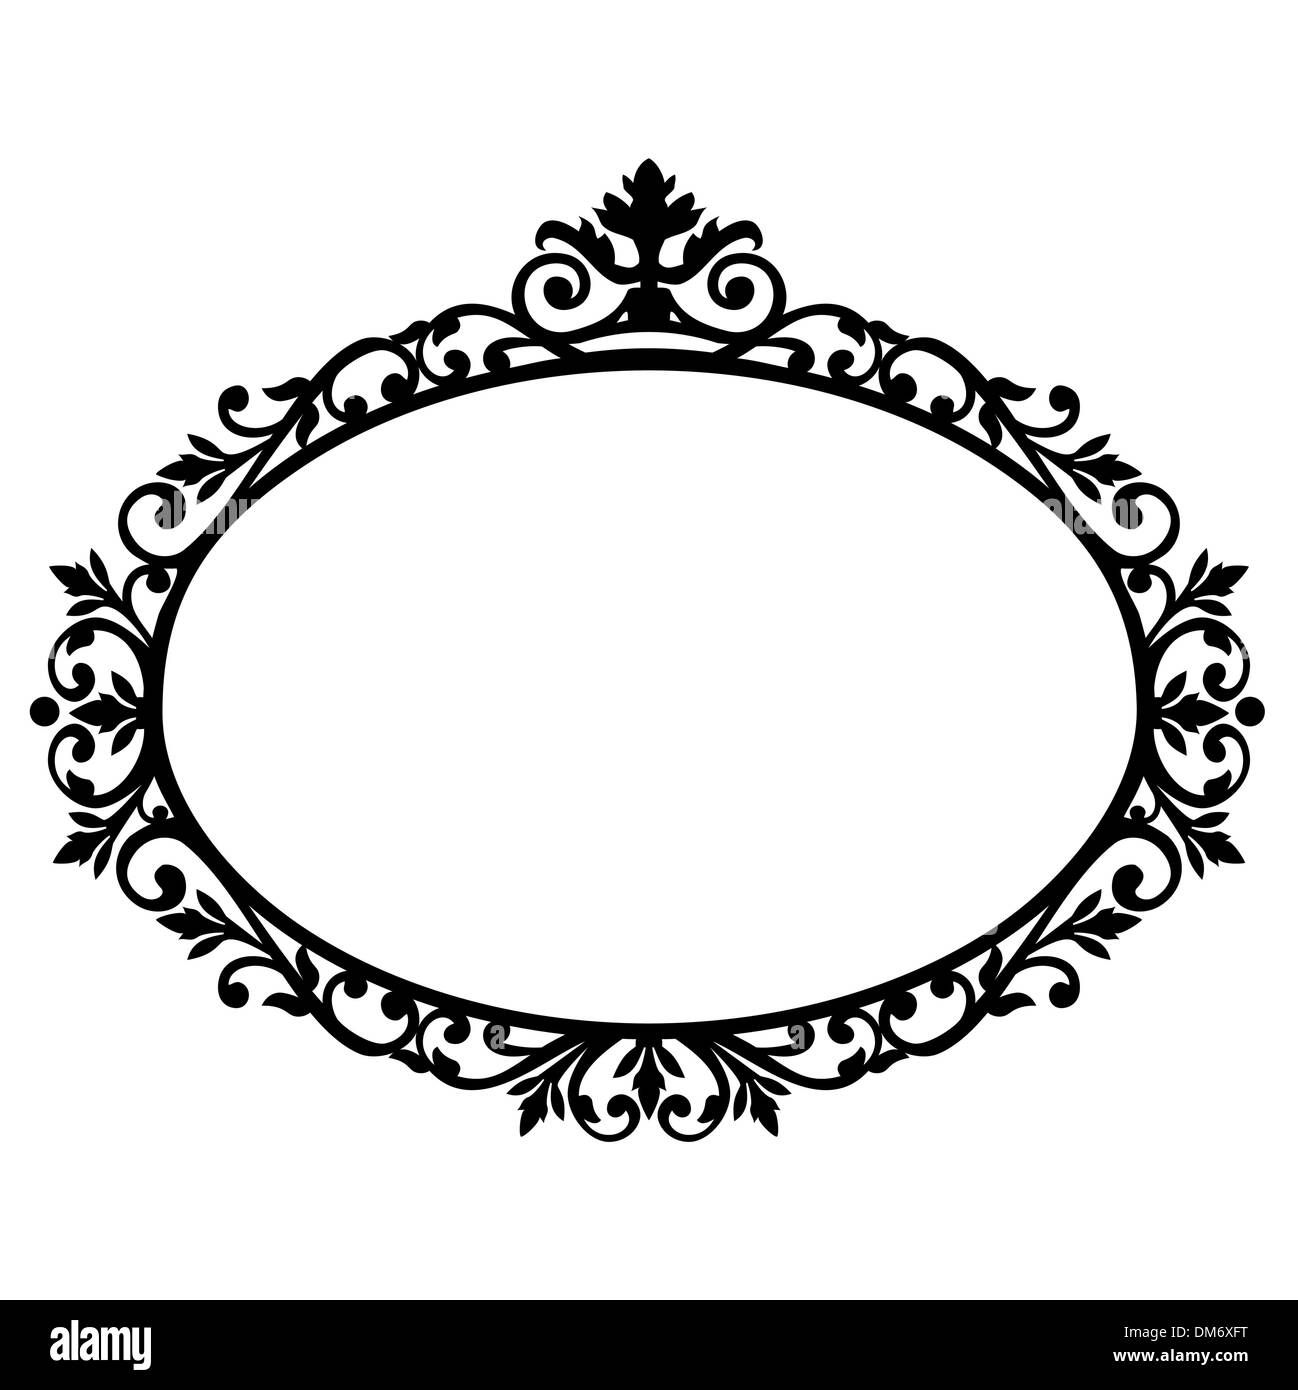 Royal frame Black and White Stock Photos & Images - Alamy